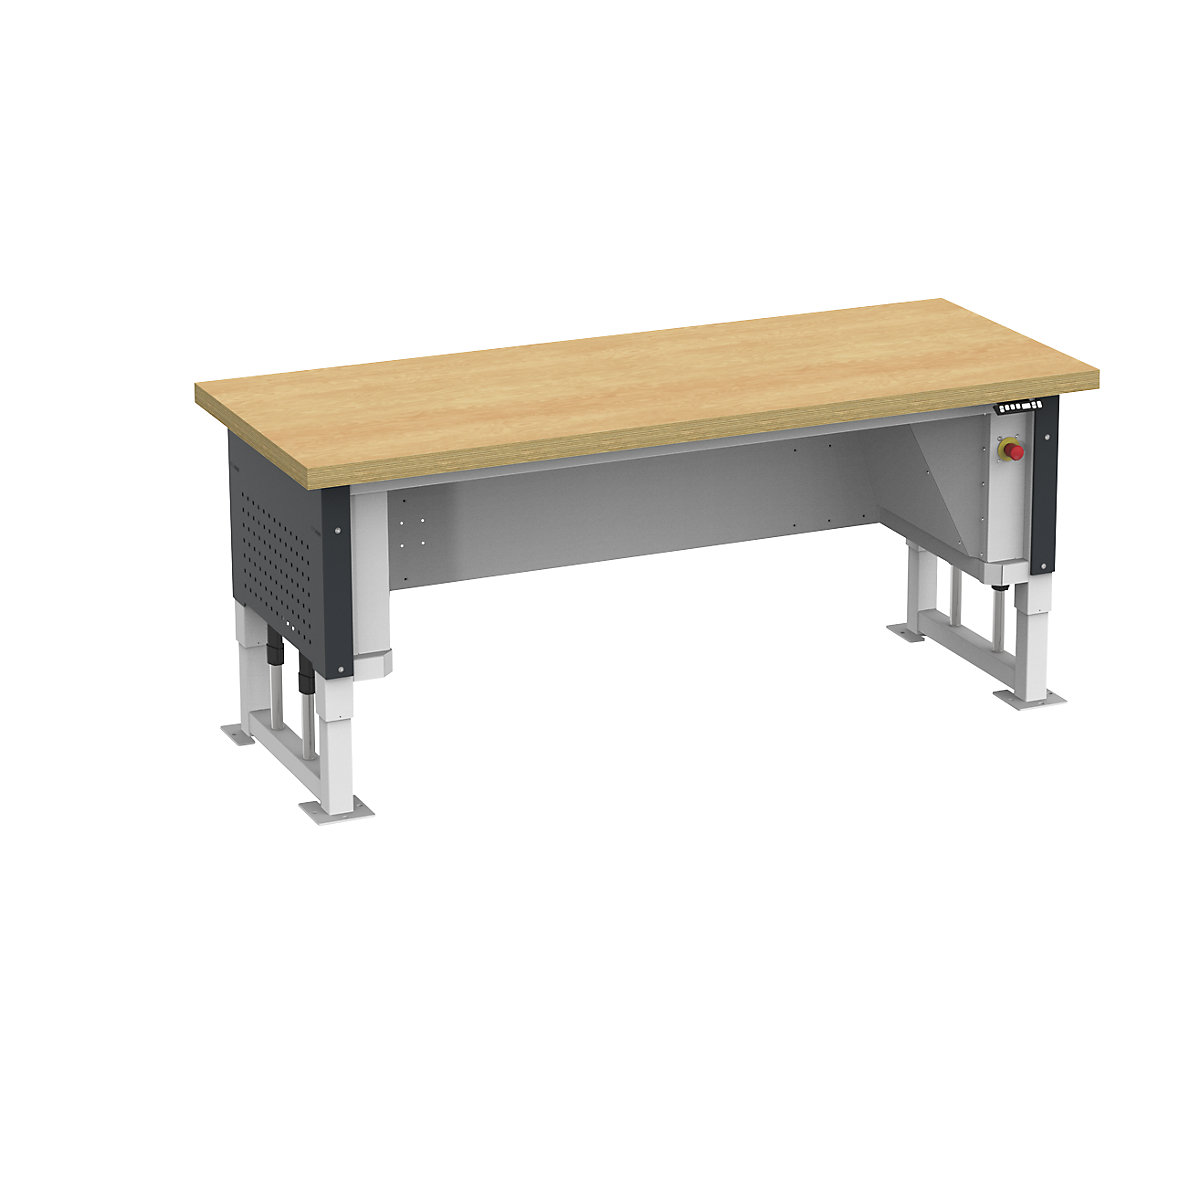 Heavy duty table, electrically height adjustable, worktop width 2030 mm, max. surface load 1000 kg, charcoal RAL 7016-2